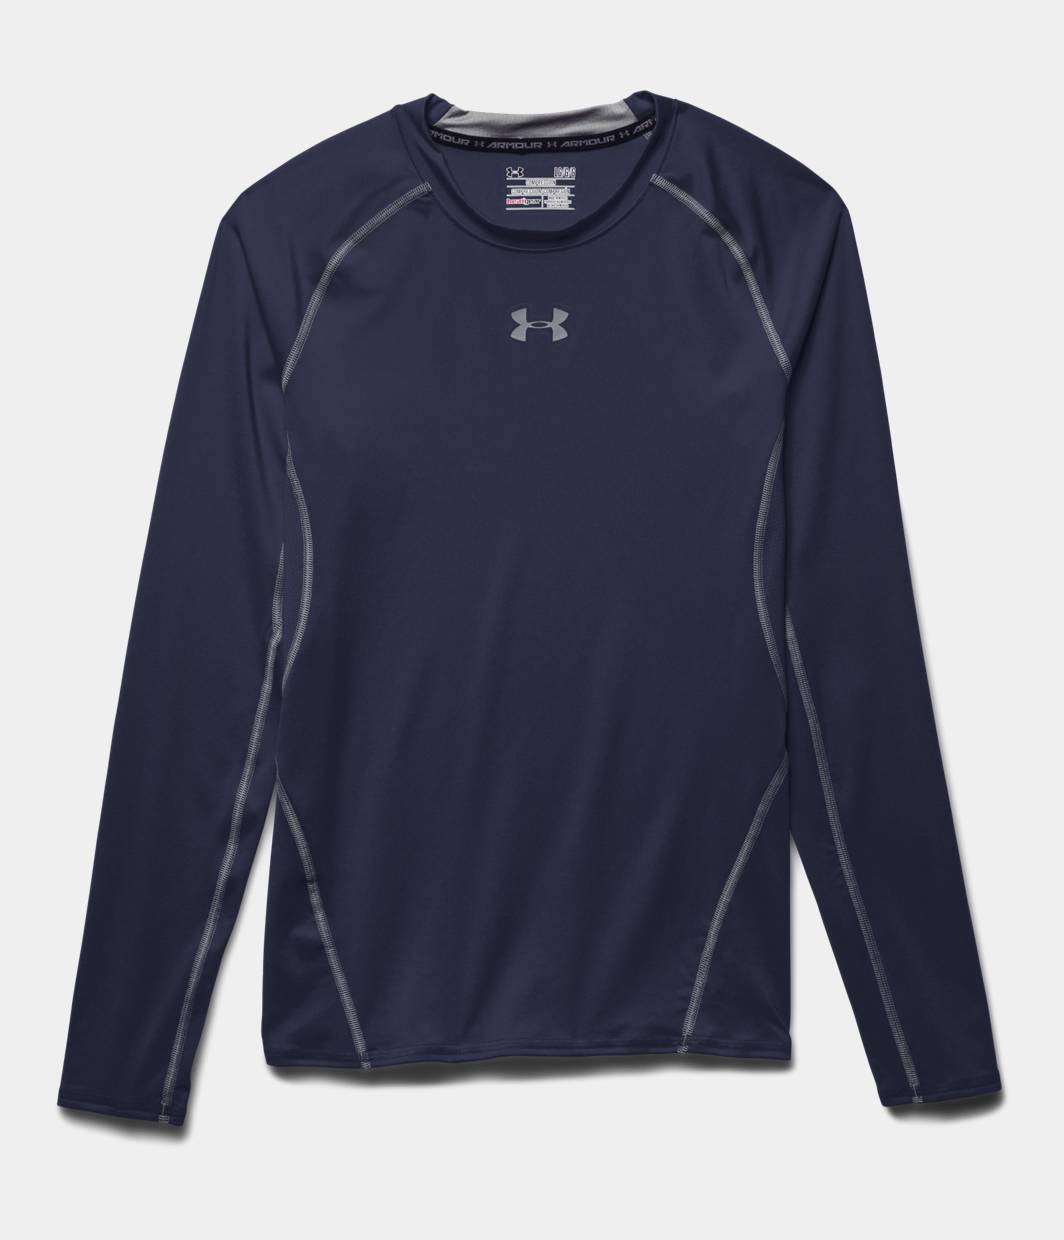 Under Armour Men's HeatGear Armour Long Sleeve Compression Shirt 1257471-410 Midnight Navy - image 2 of 4